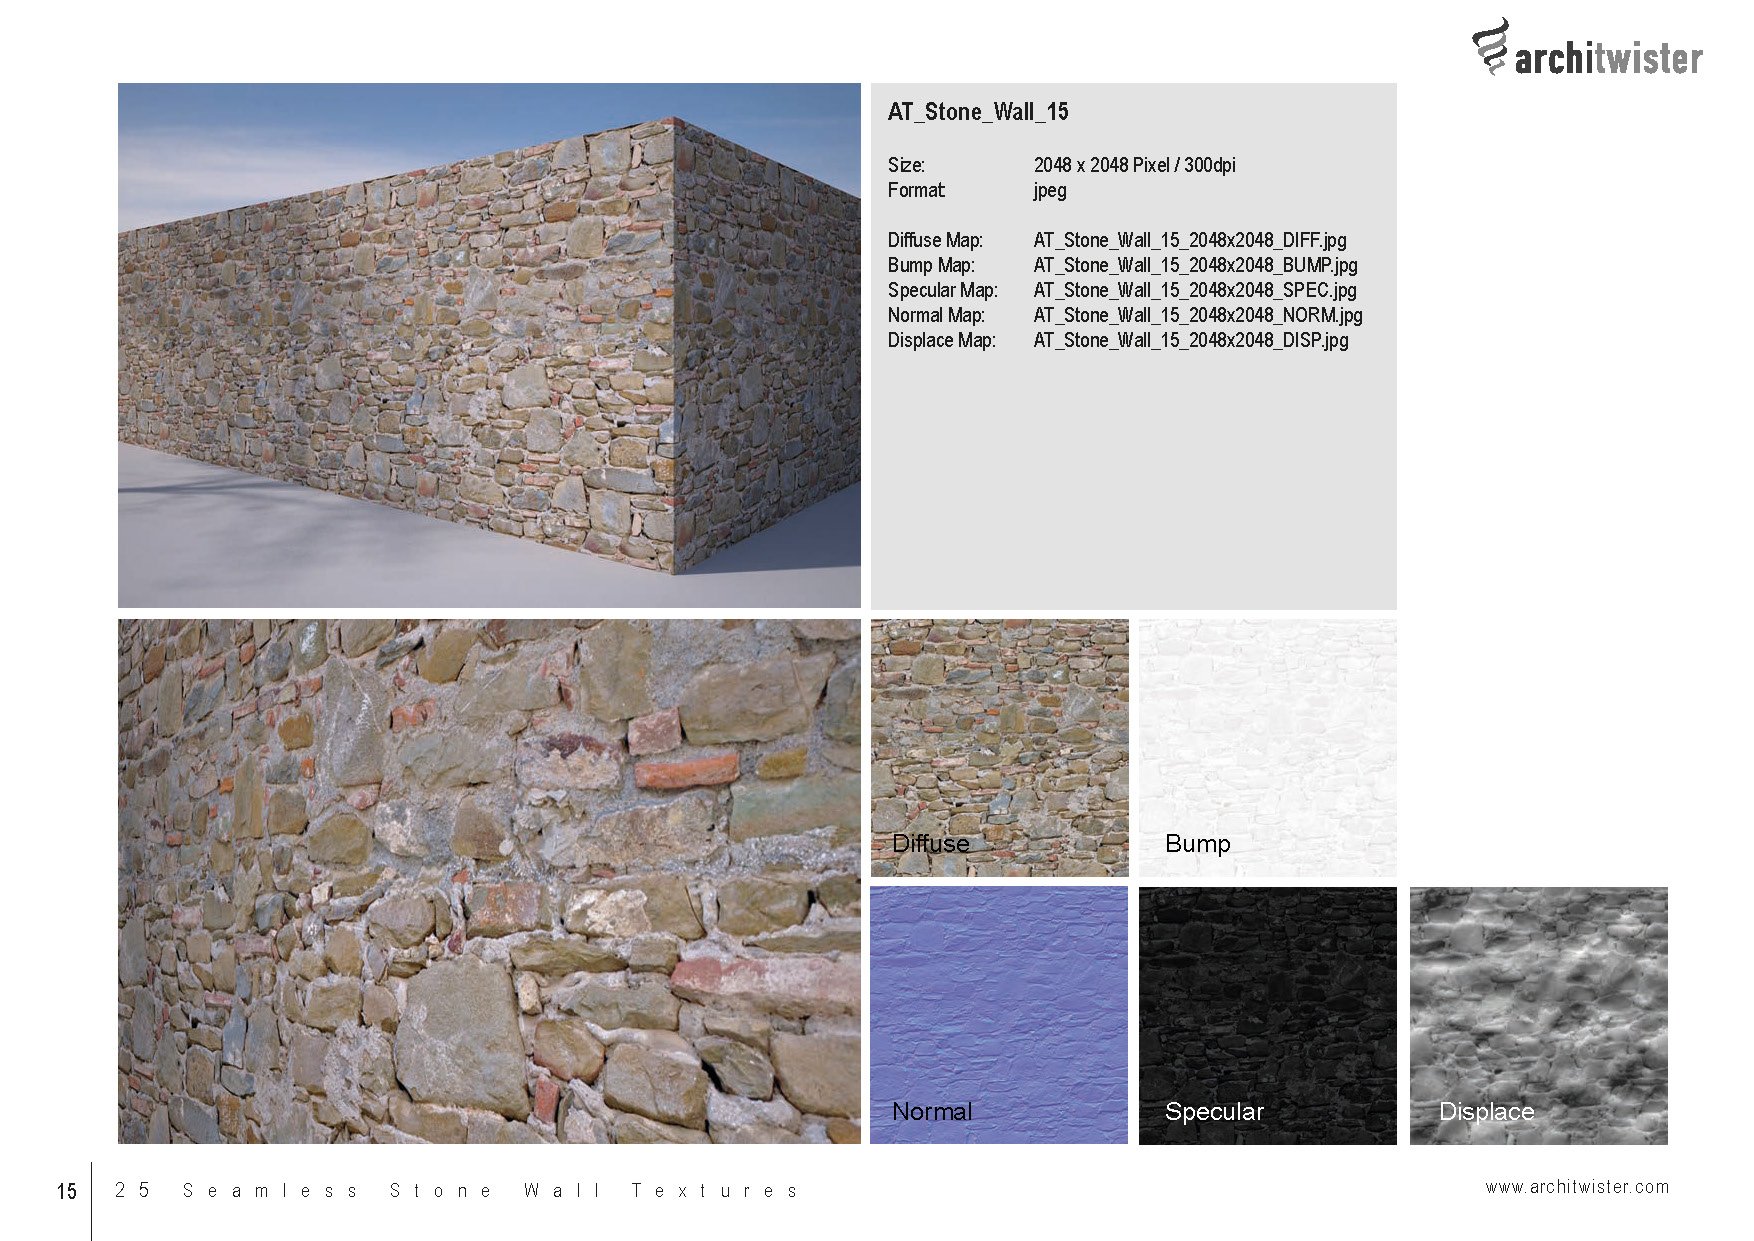 at stone wall textures catalog 01 seite 16 507